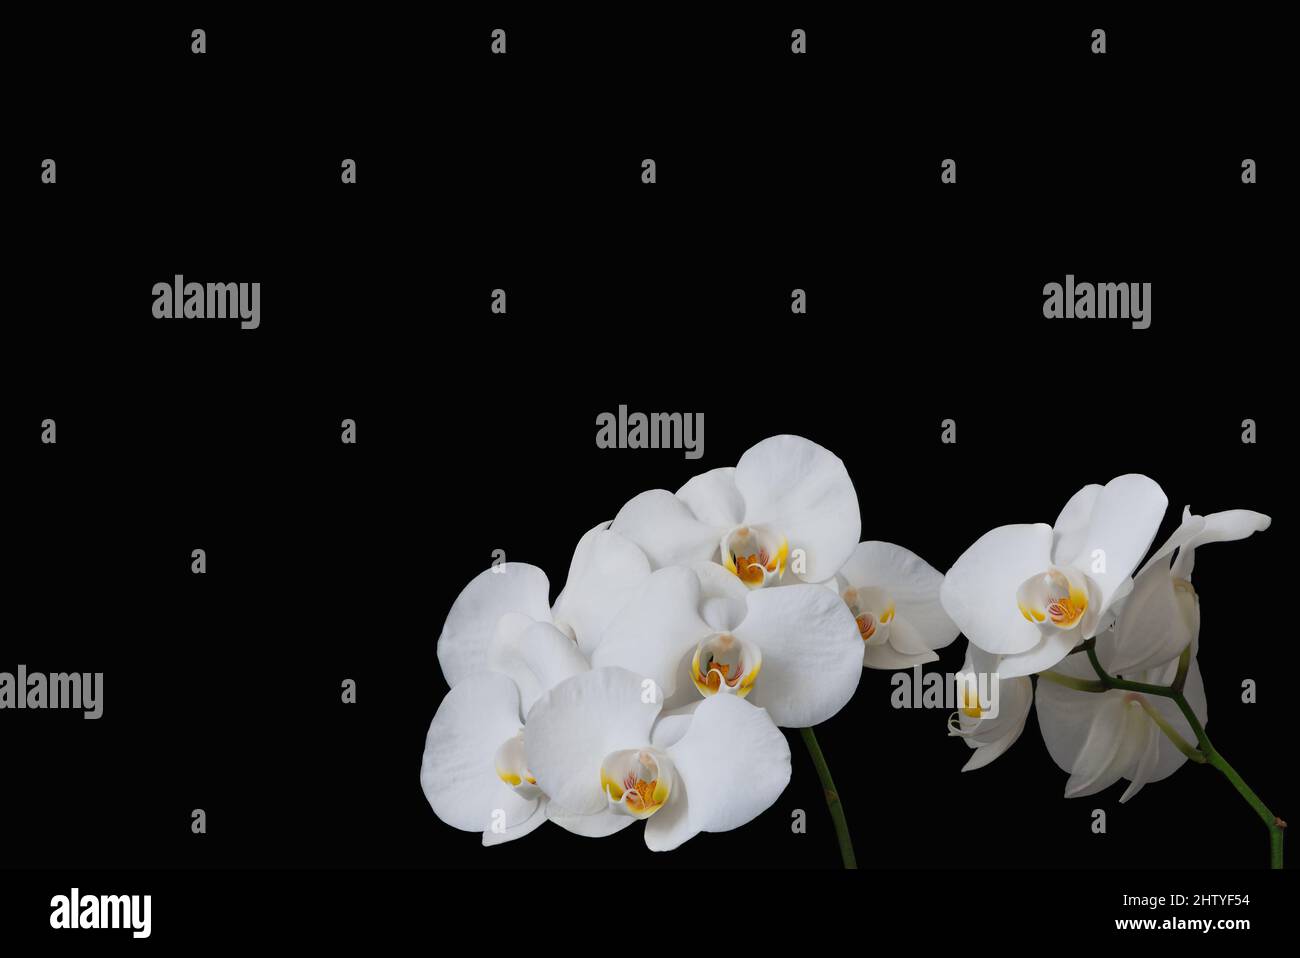 Frame with white orchid flowers on black background (all in focus) Stock Photo